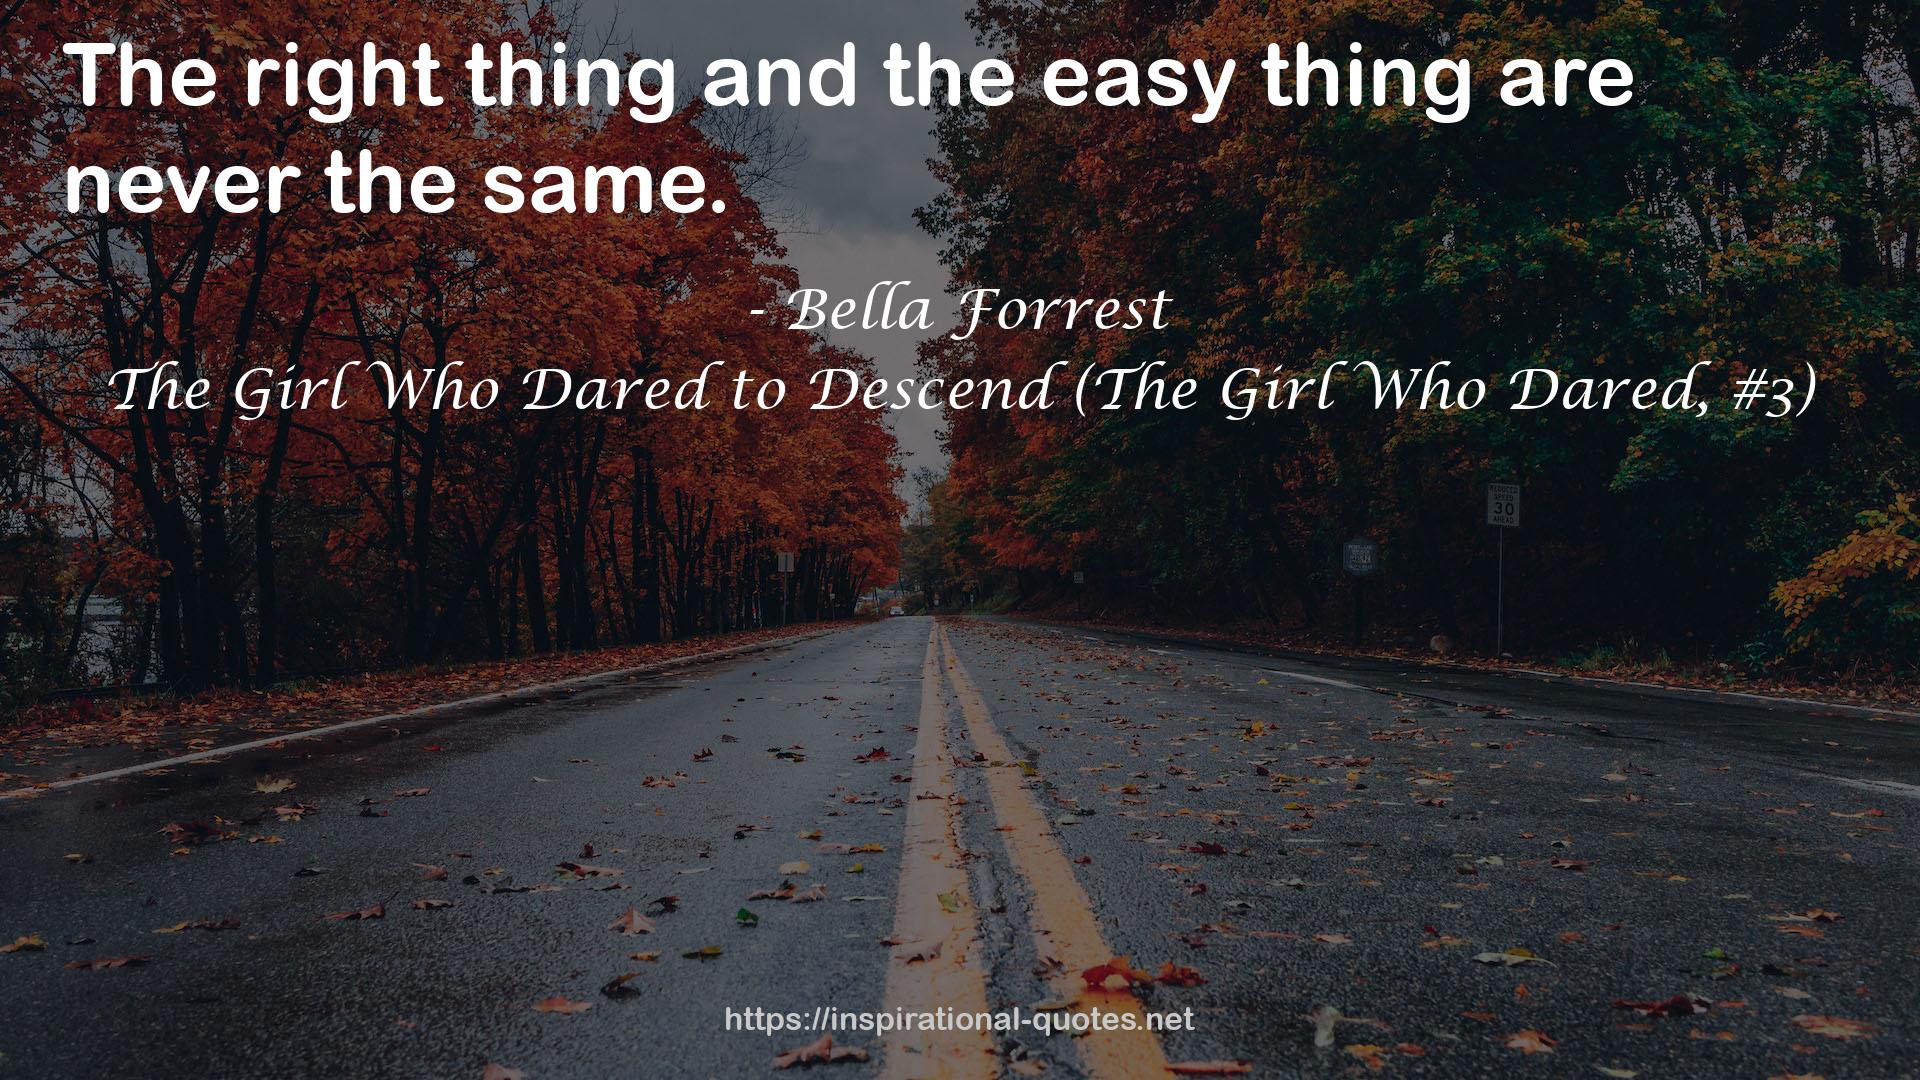 The Girl Who Dared to Descend (The Girl Who Dared, #3) QUOTES